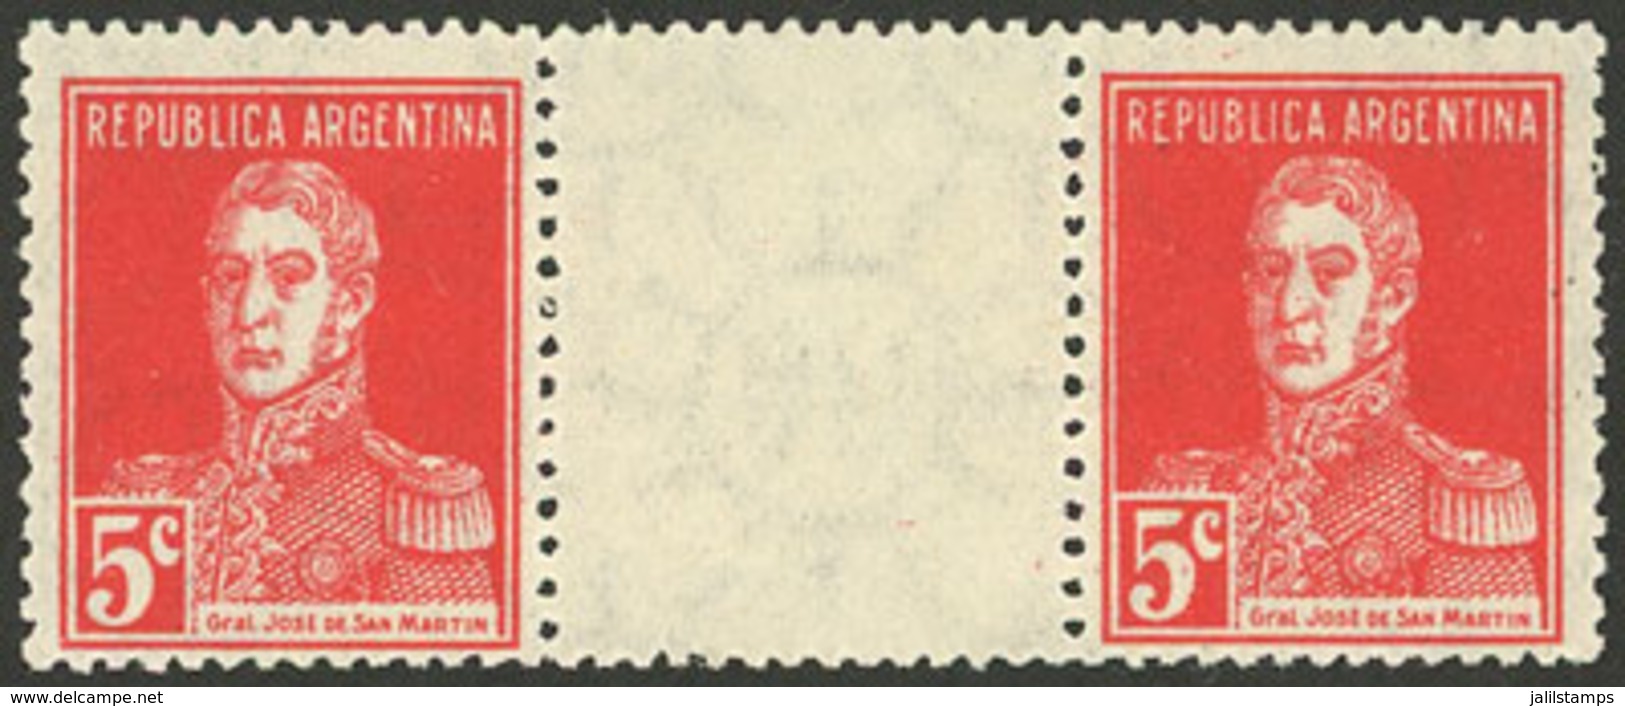 ARGENTINA: GJ.599EV, Horizontal GUTTER Pair, Mint With Tiny Hinge Marks, Excellent Quality! - Covers & Documents